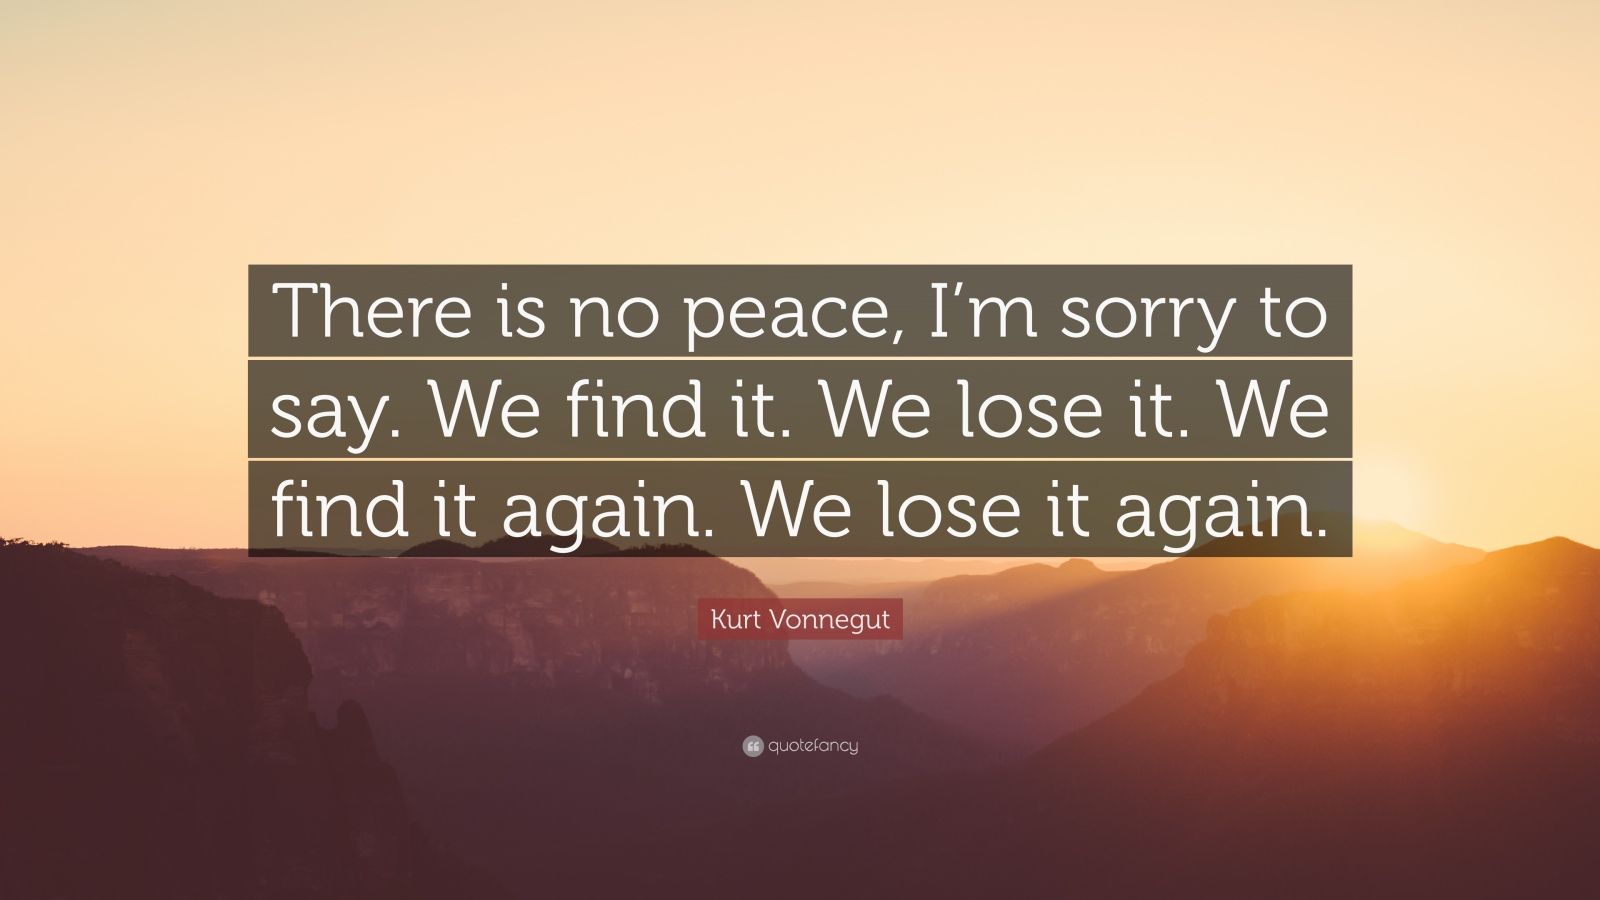 Kurt Vonnegut Quote There Is No Peace I M Sorry To Say We Find It We Lose It We Find It Again We Lose It Again